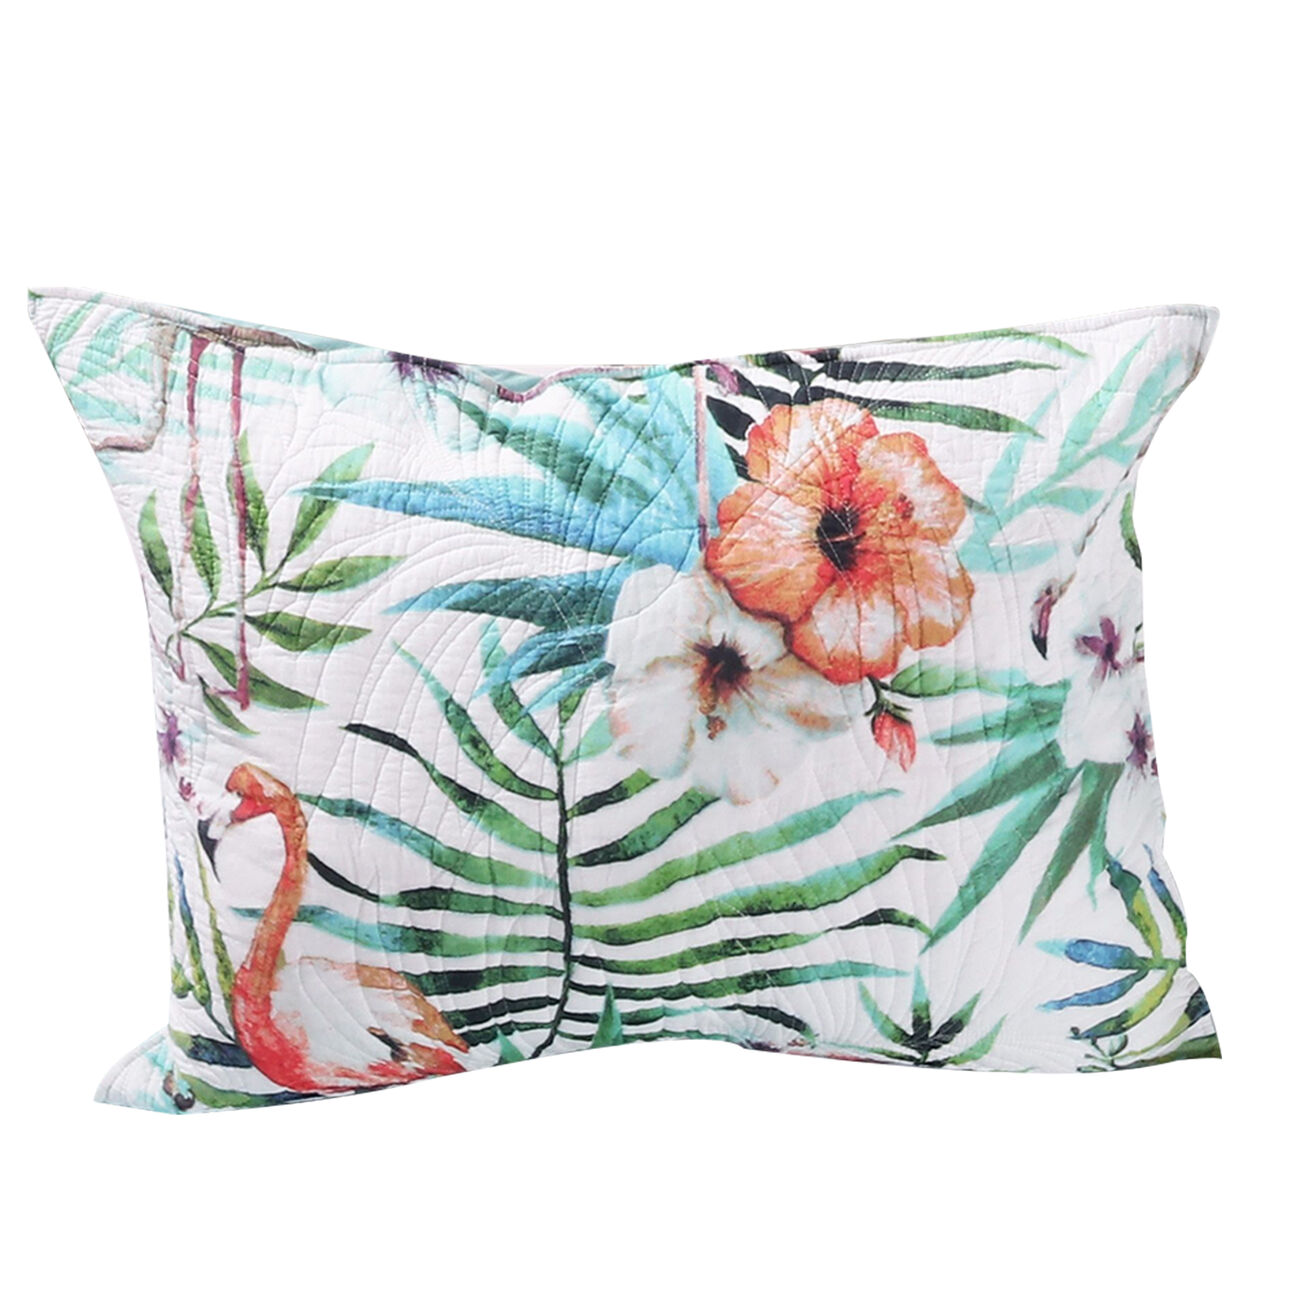 20 X 36 Floral Print Pillow Sham with Cotton and Polyester Fill, Multicolor